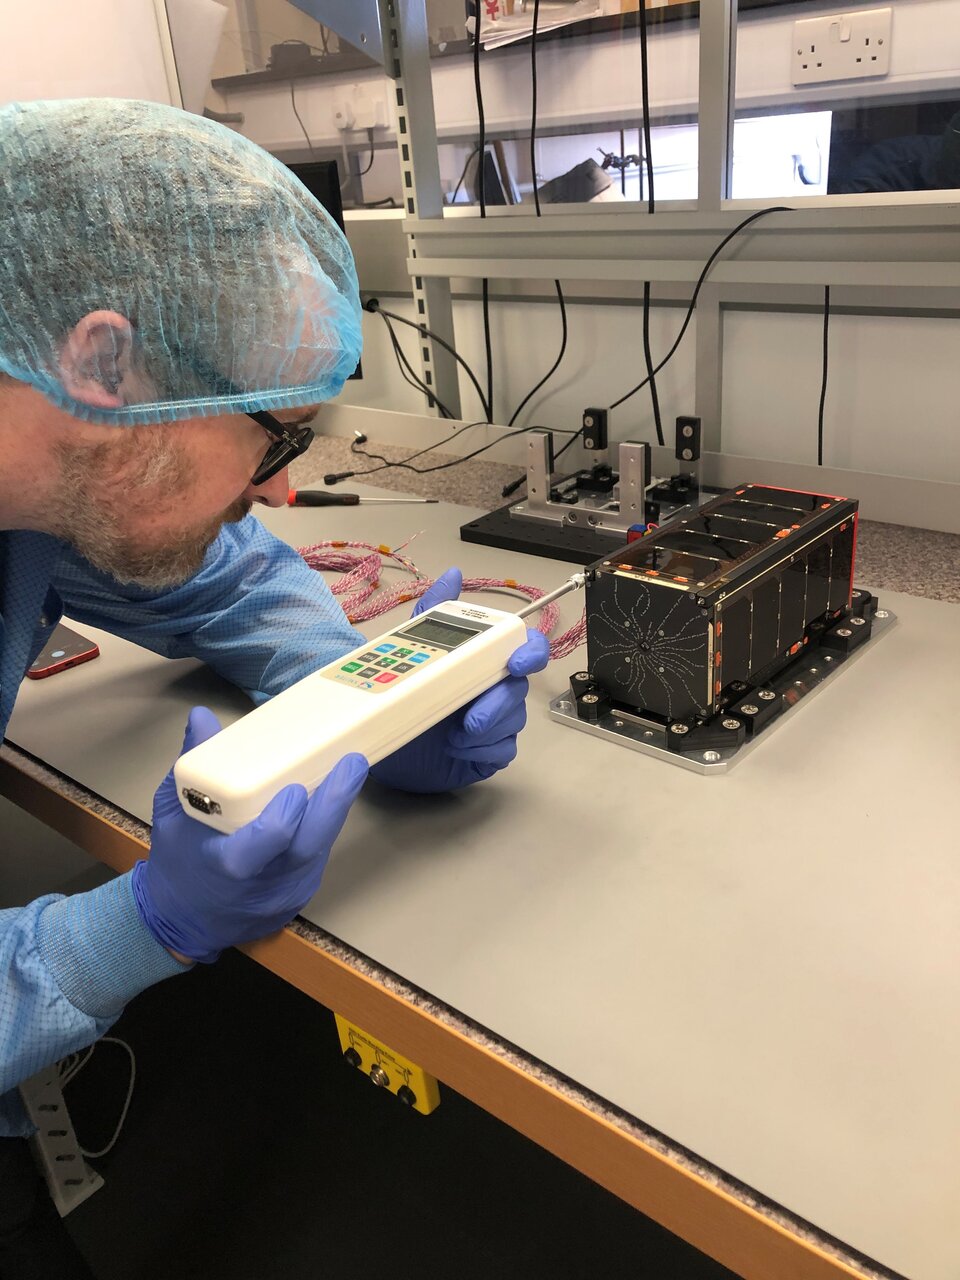 Measuring the spring force of the EIRSAT-1 satellite